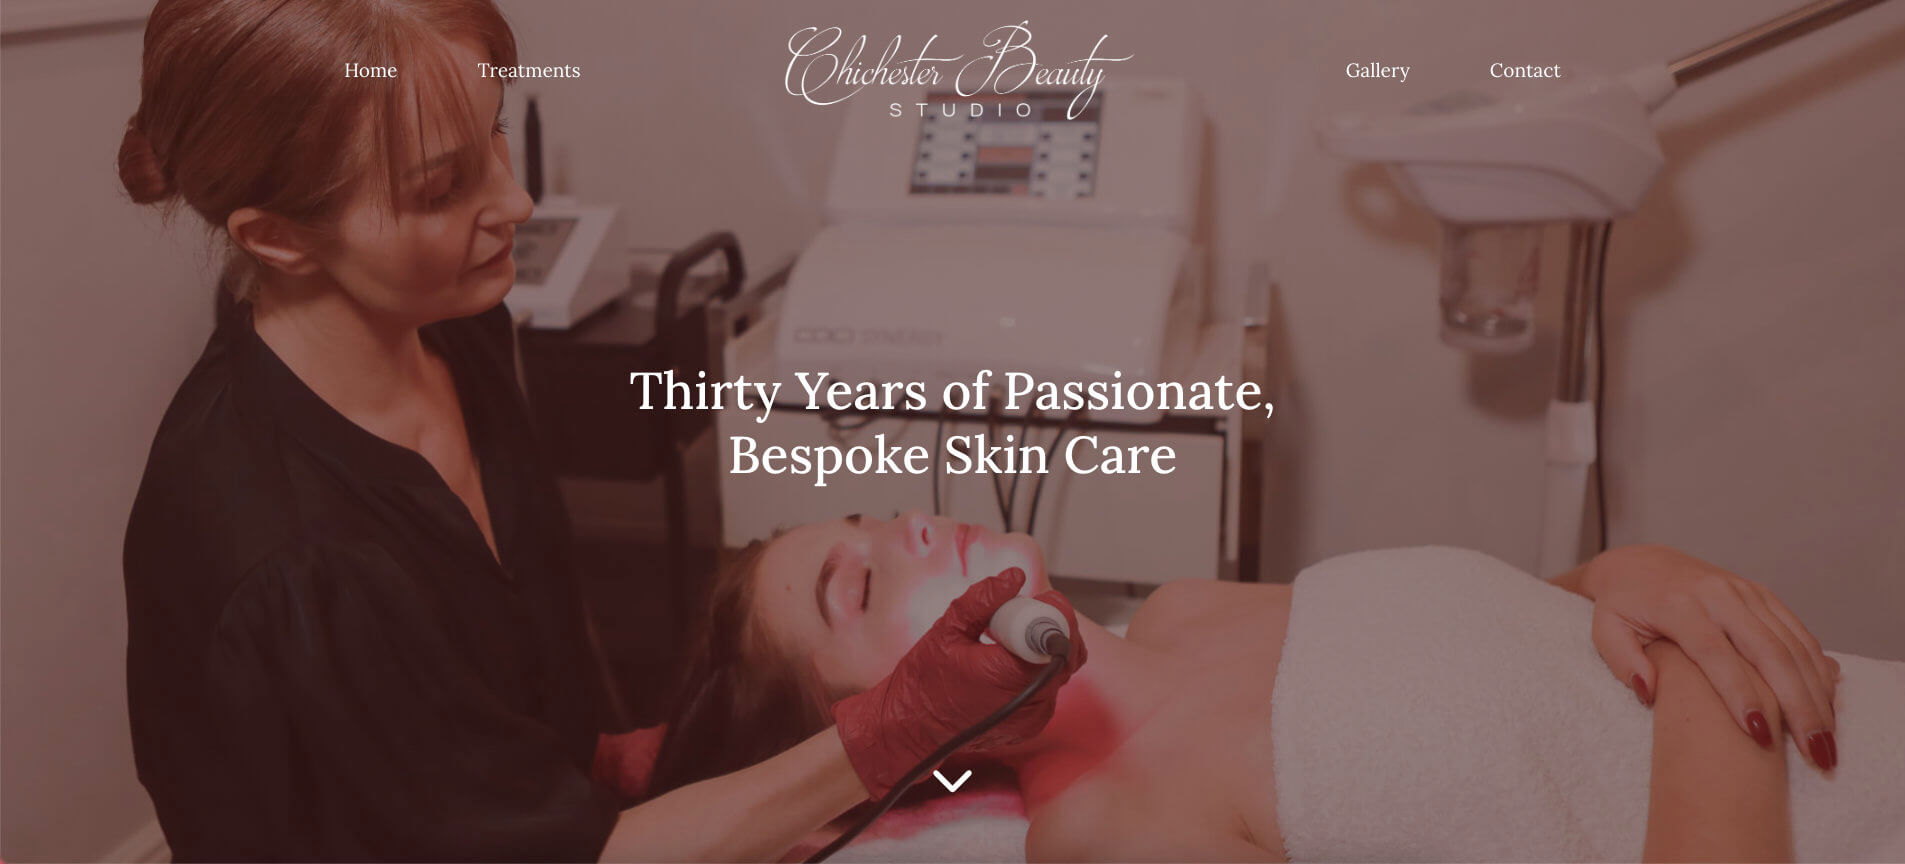 Chichester Beauty website of the month